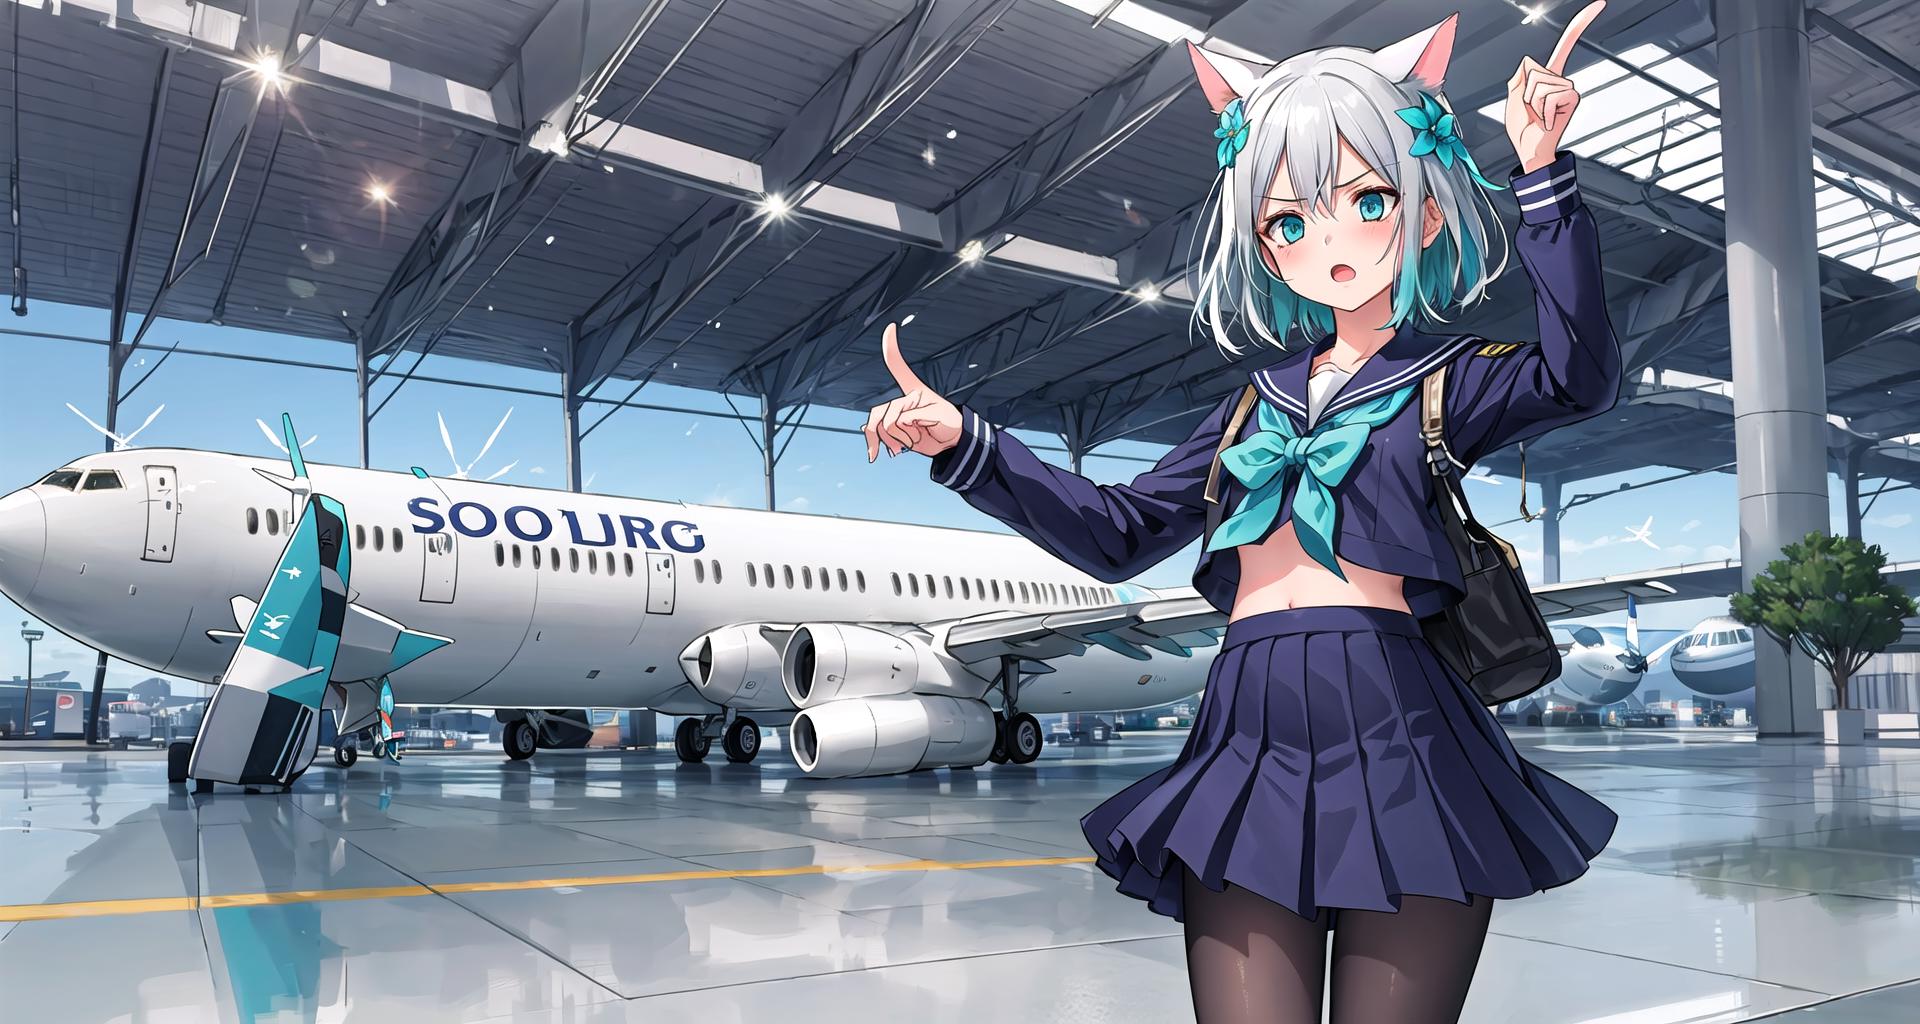 Anime-viation! | Cultural observations from my time in Japan